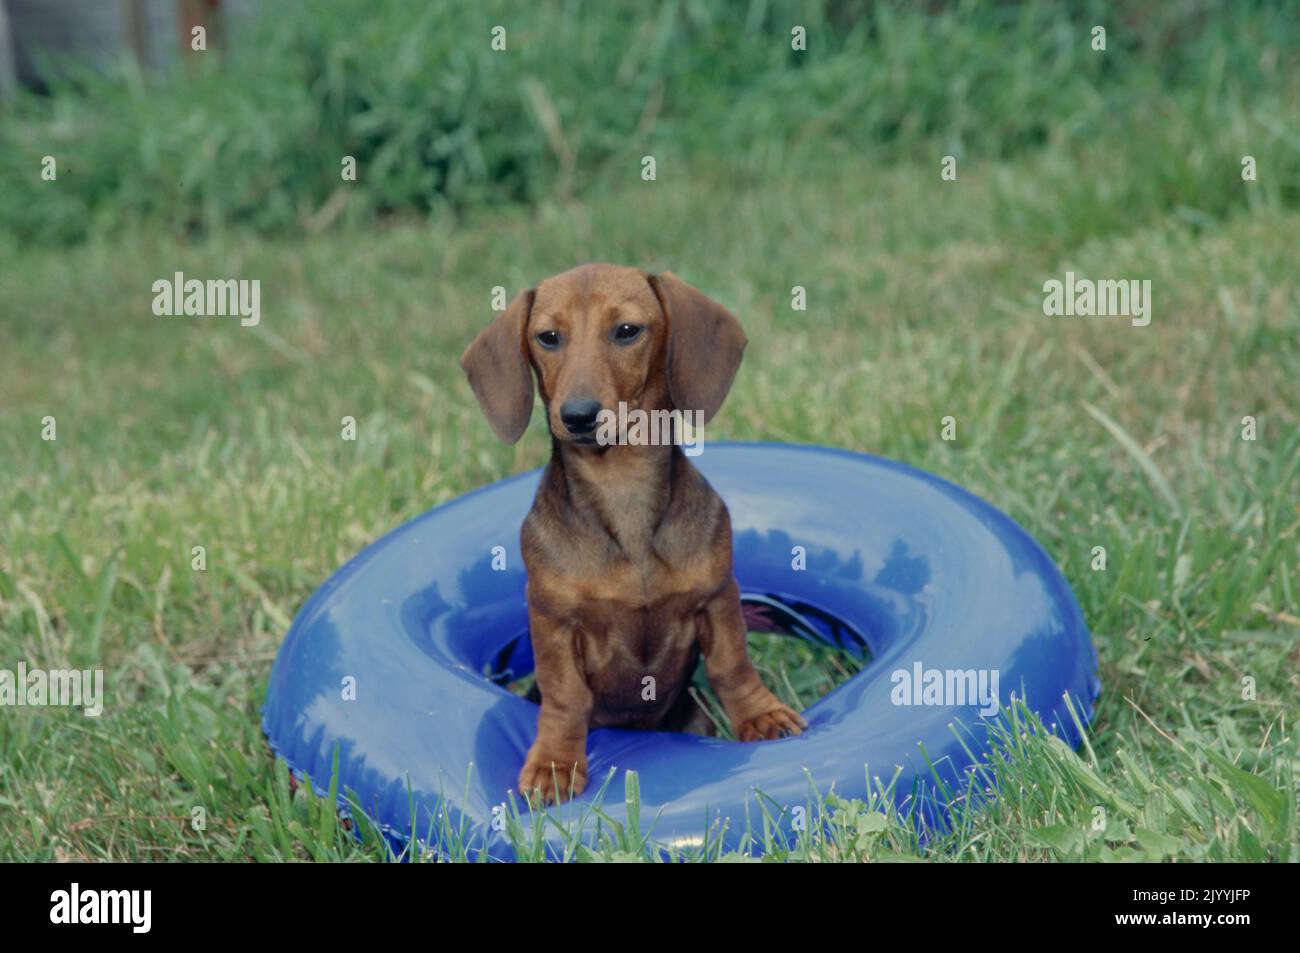 Dachshund in grass field on toy Stock Photo